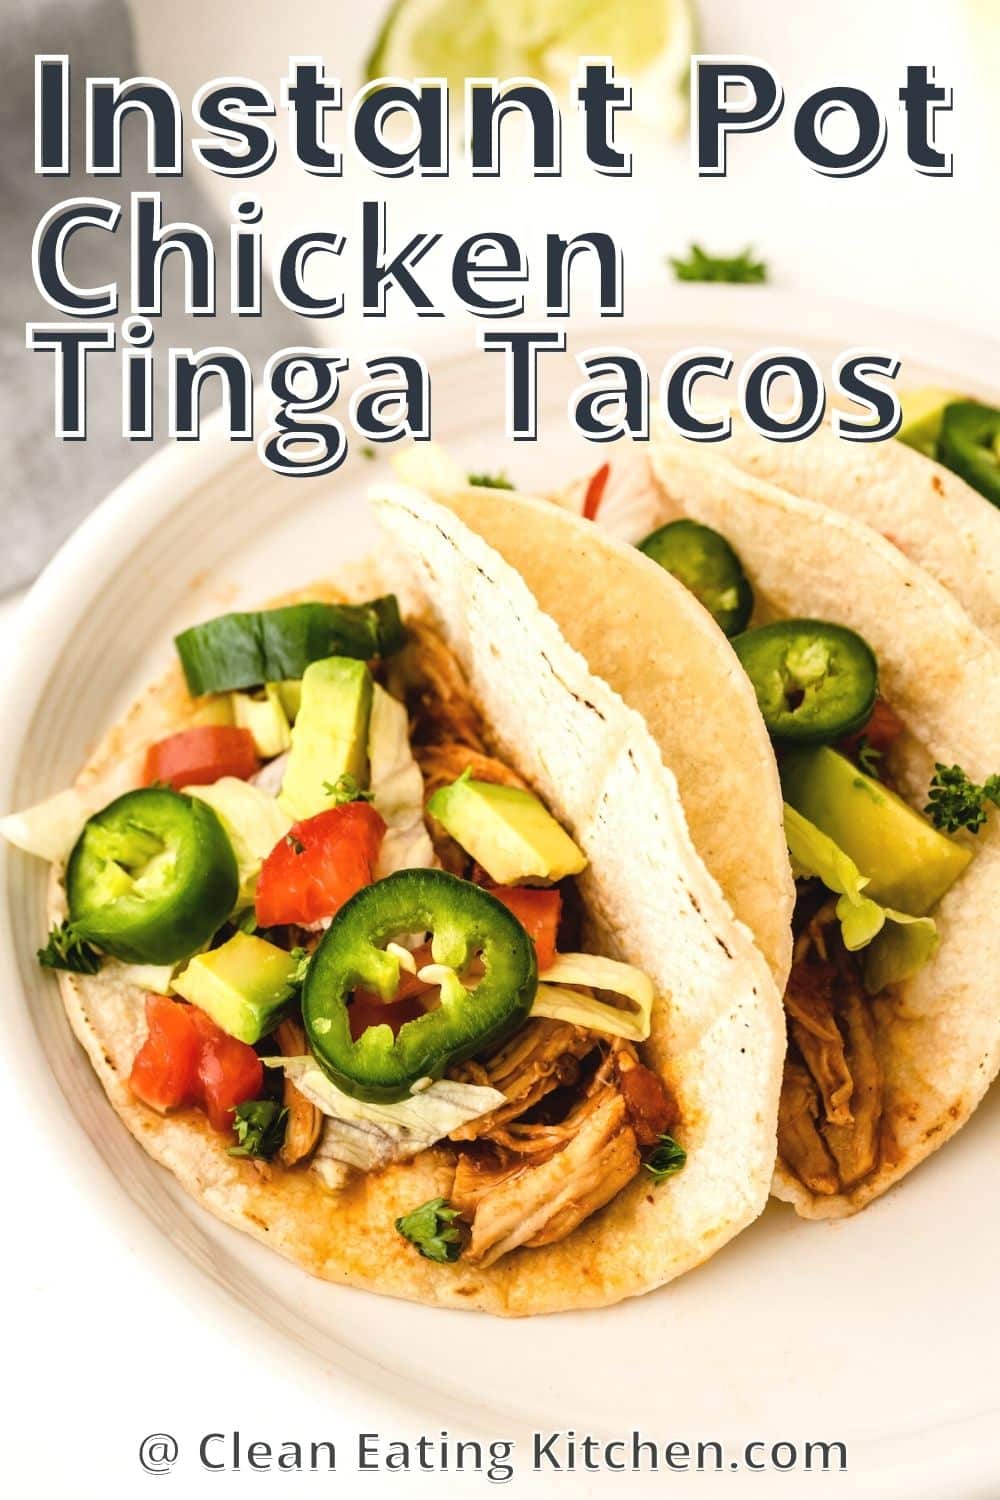 Instant Pot Chicken Tinga Tacos - Clean Eating Kitchen